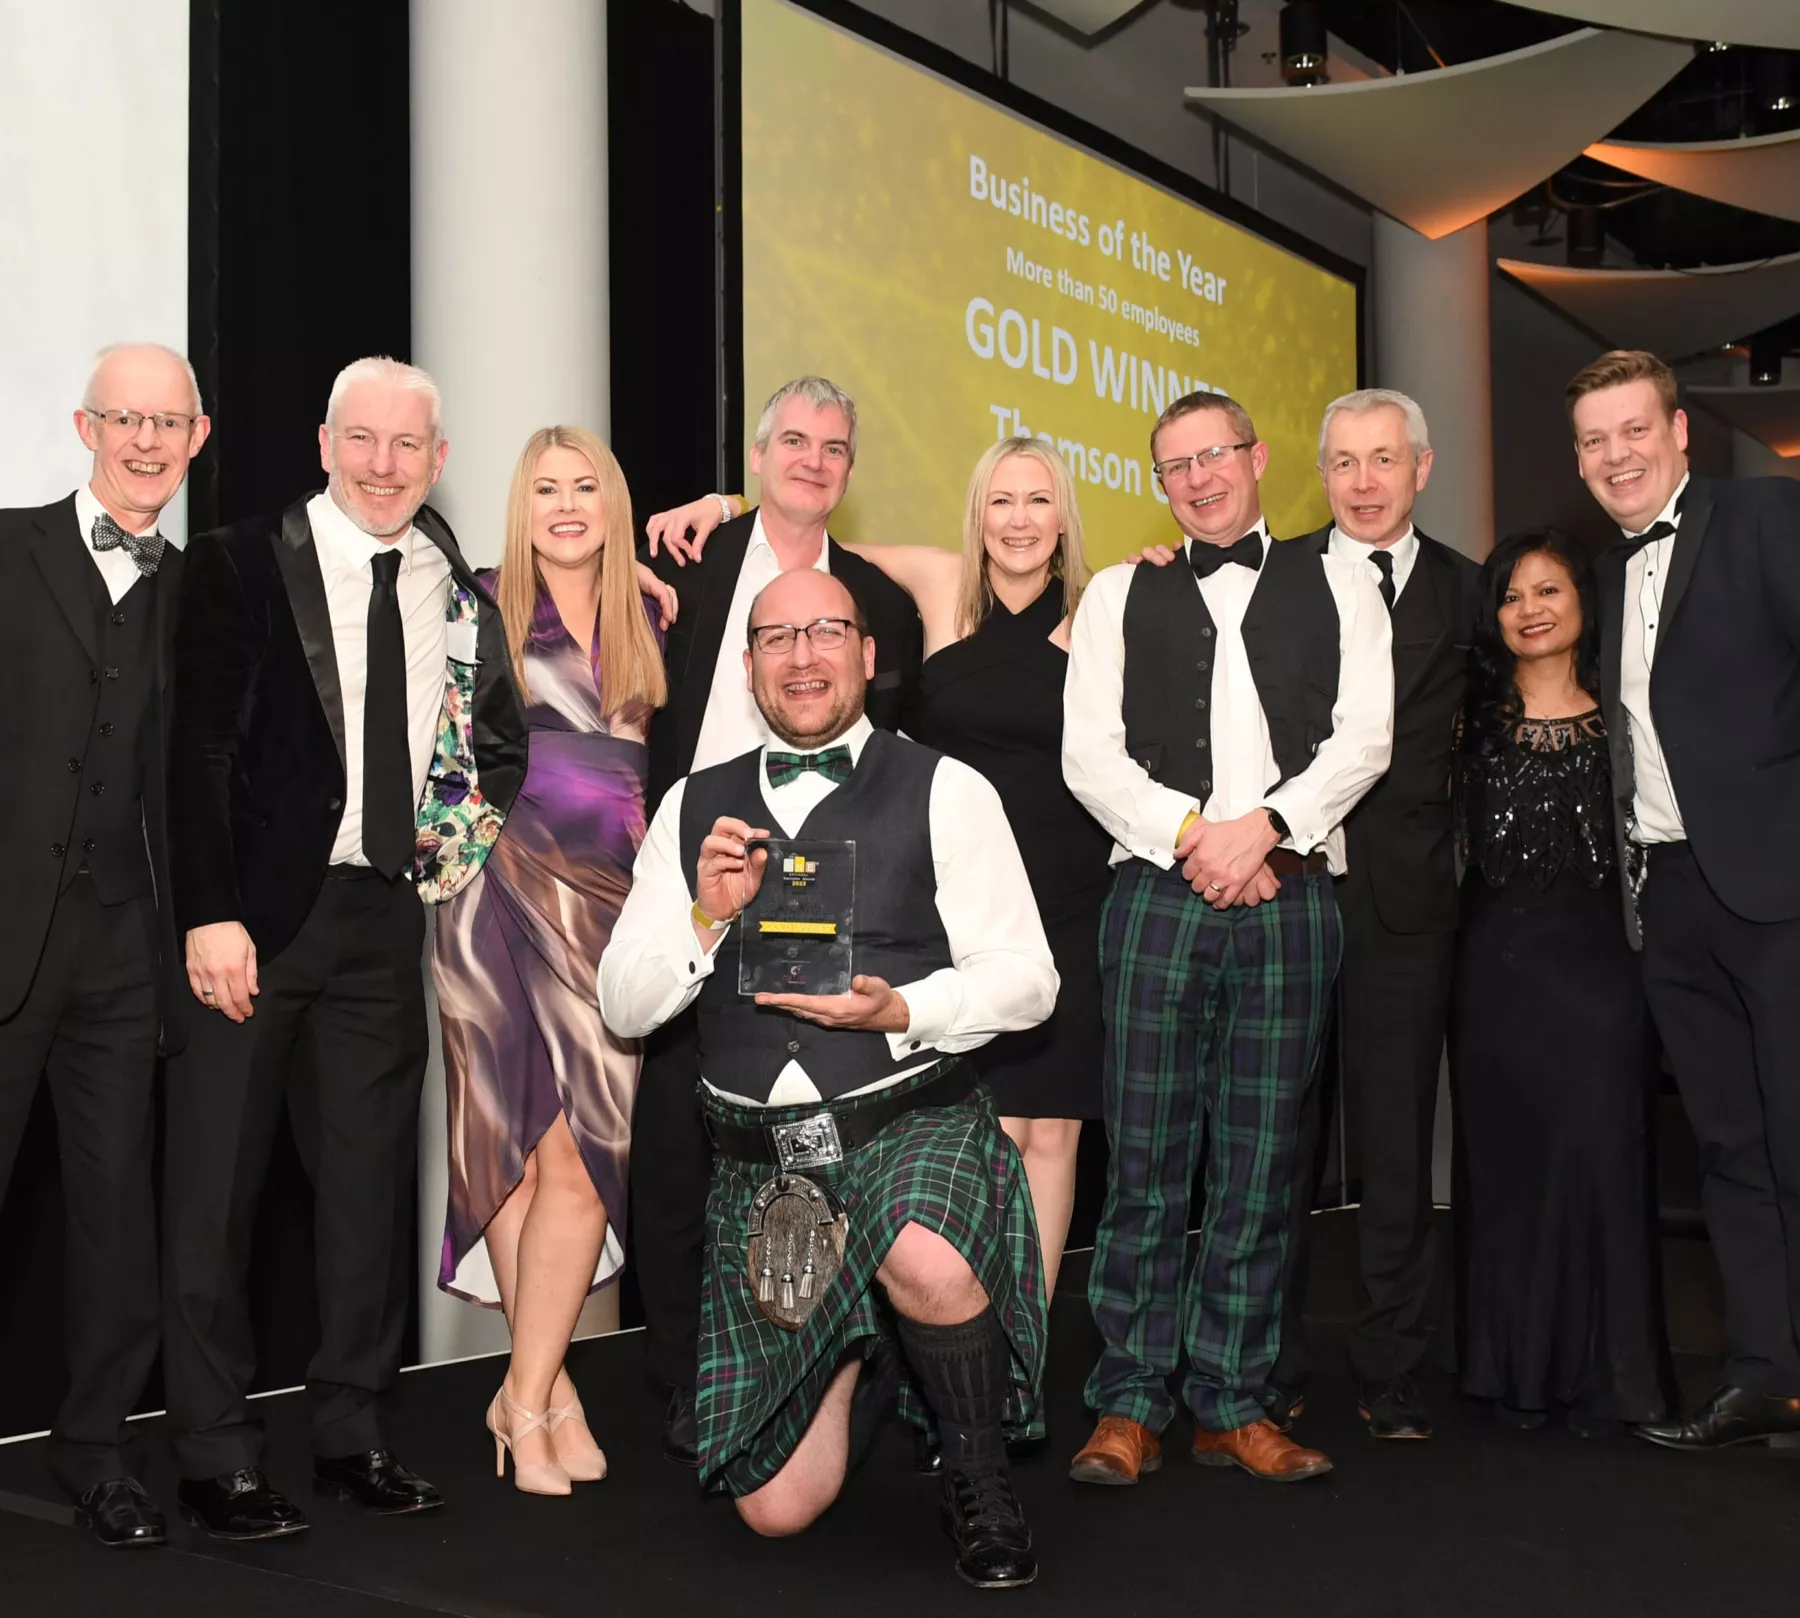 Photograph of members of the Thomson Gray team on stage accepting the gold award for Business of the Year at the National SME Awards at Wembley arena, London.